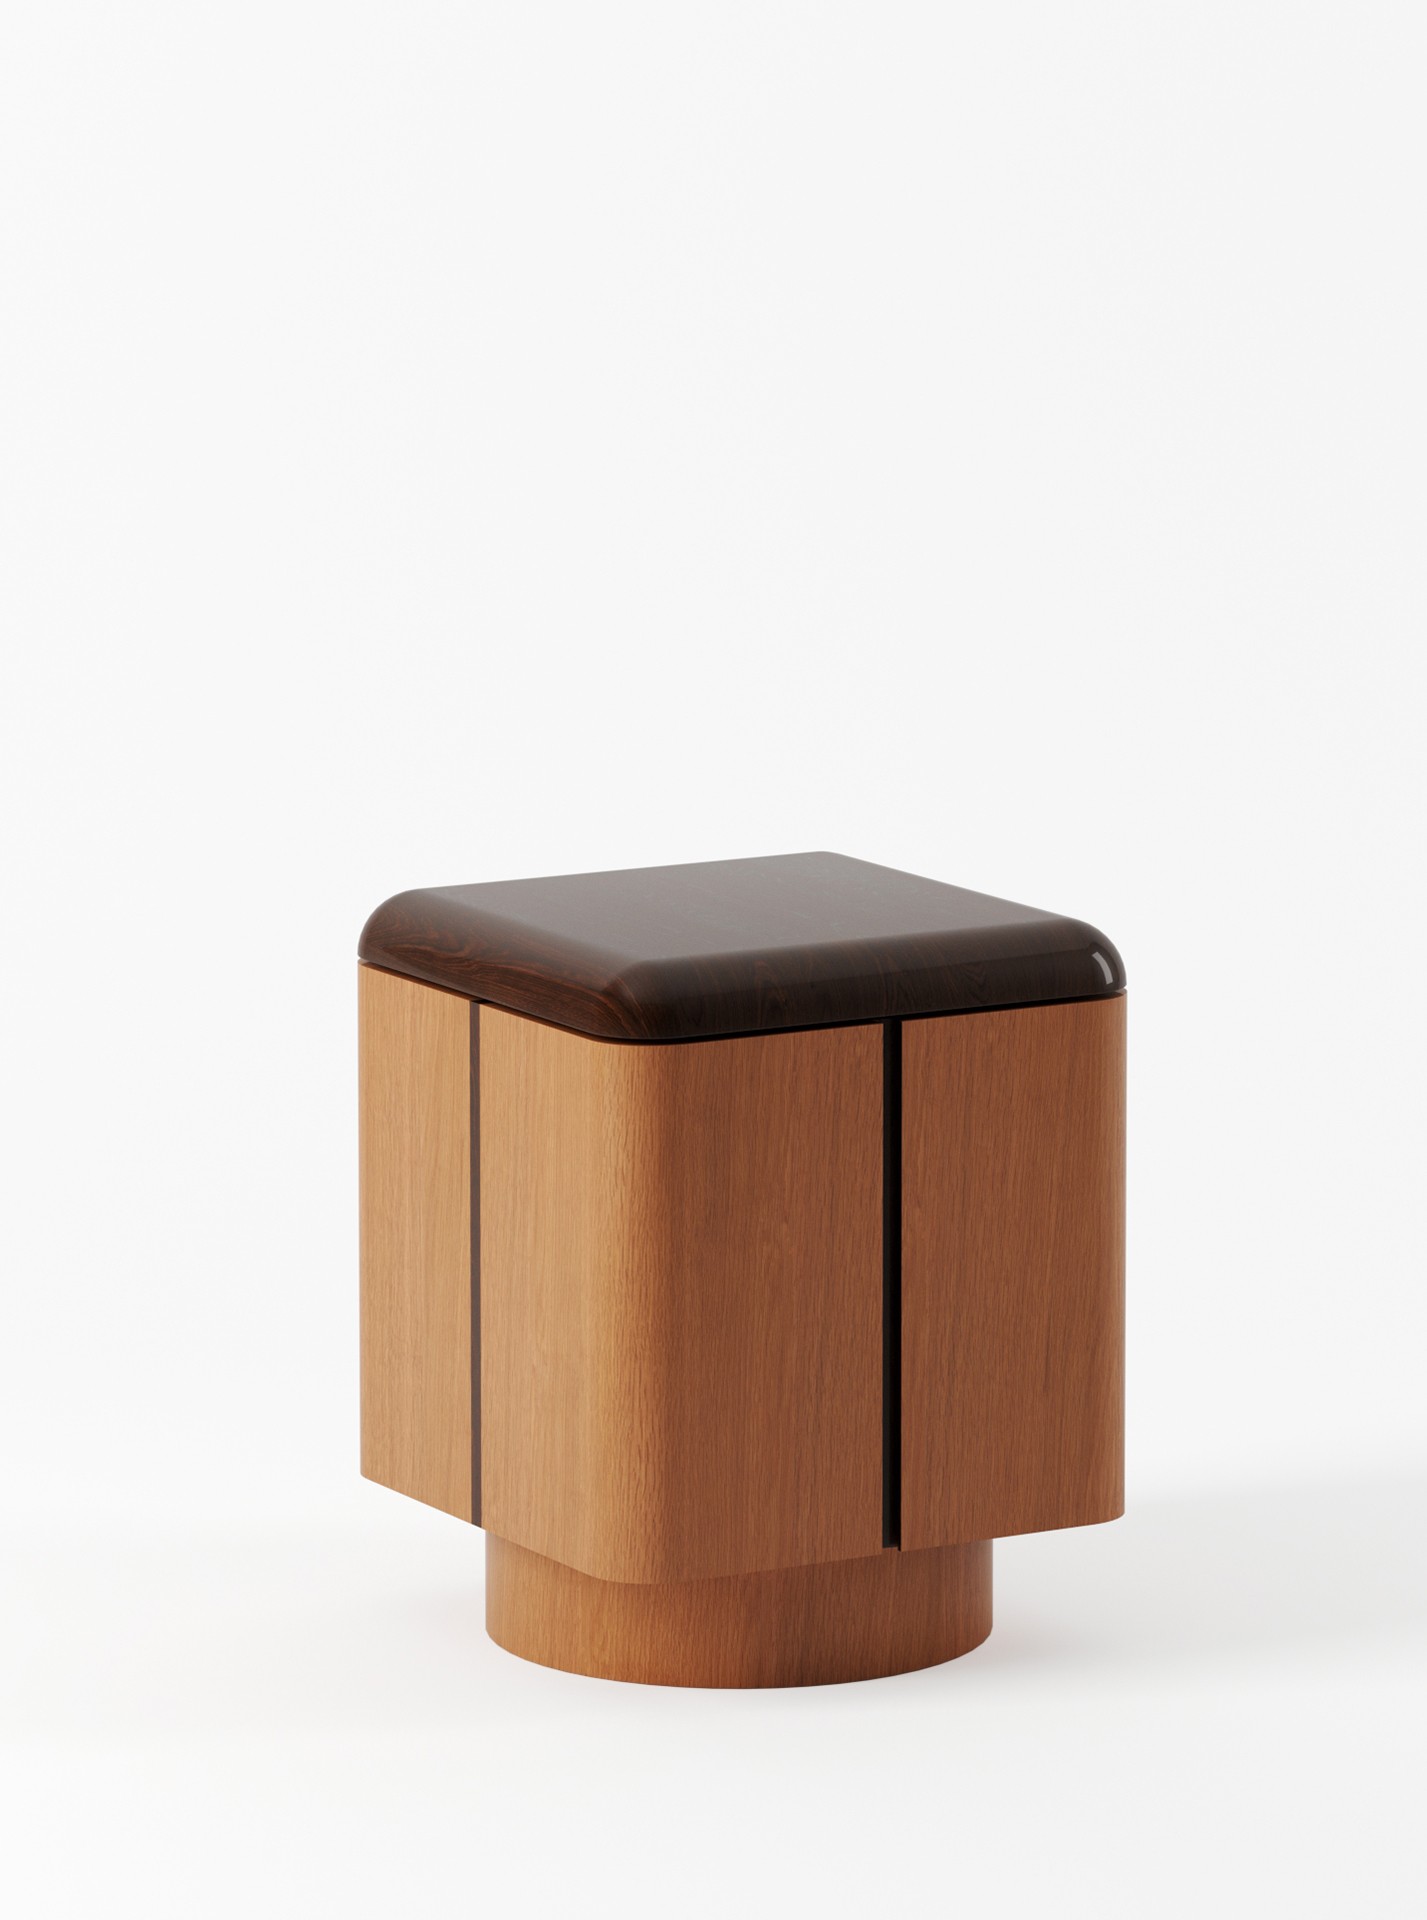 a wooden stool with a black leather seat